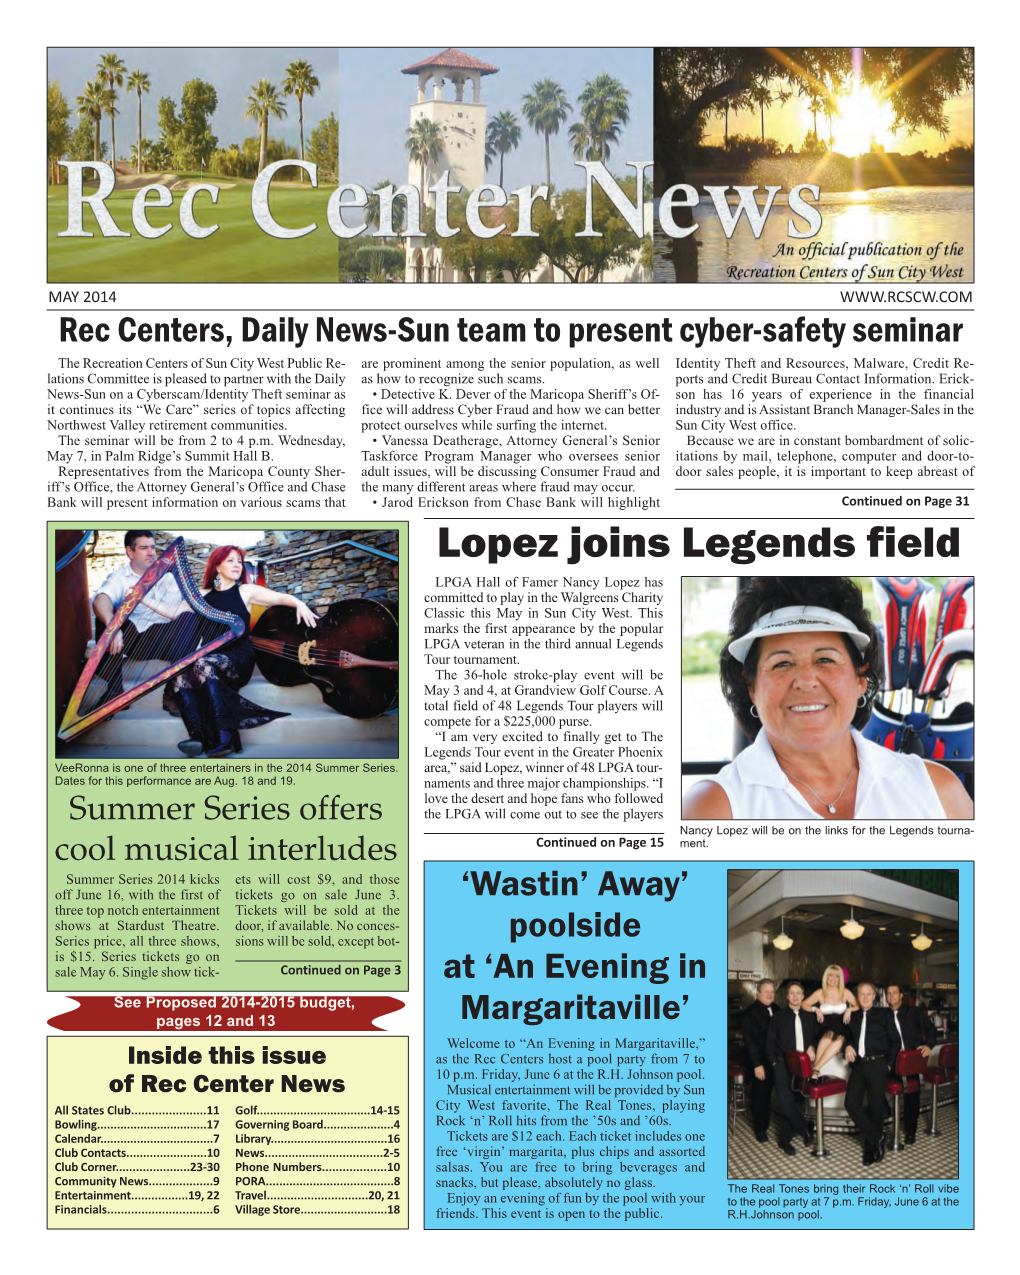 Rec Centers, Daily News-Sun Team to Present Cyber-Safety Seminar